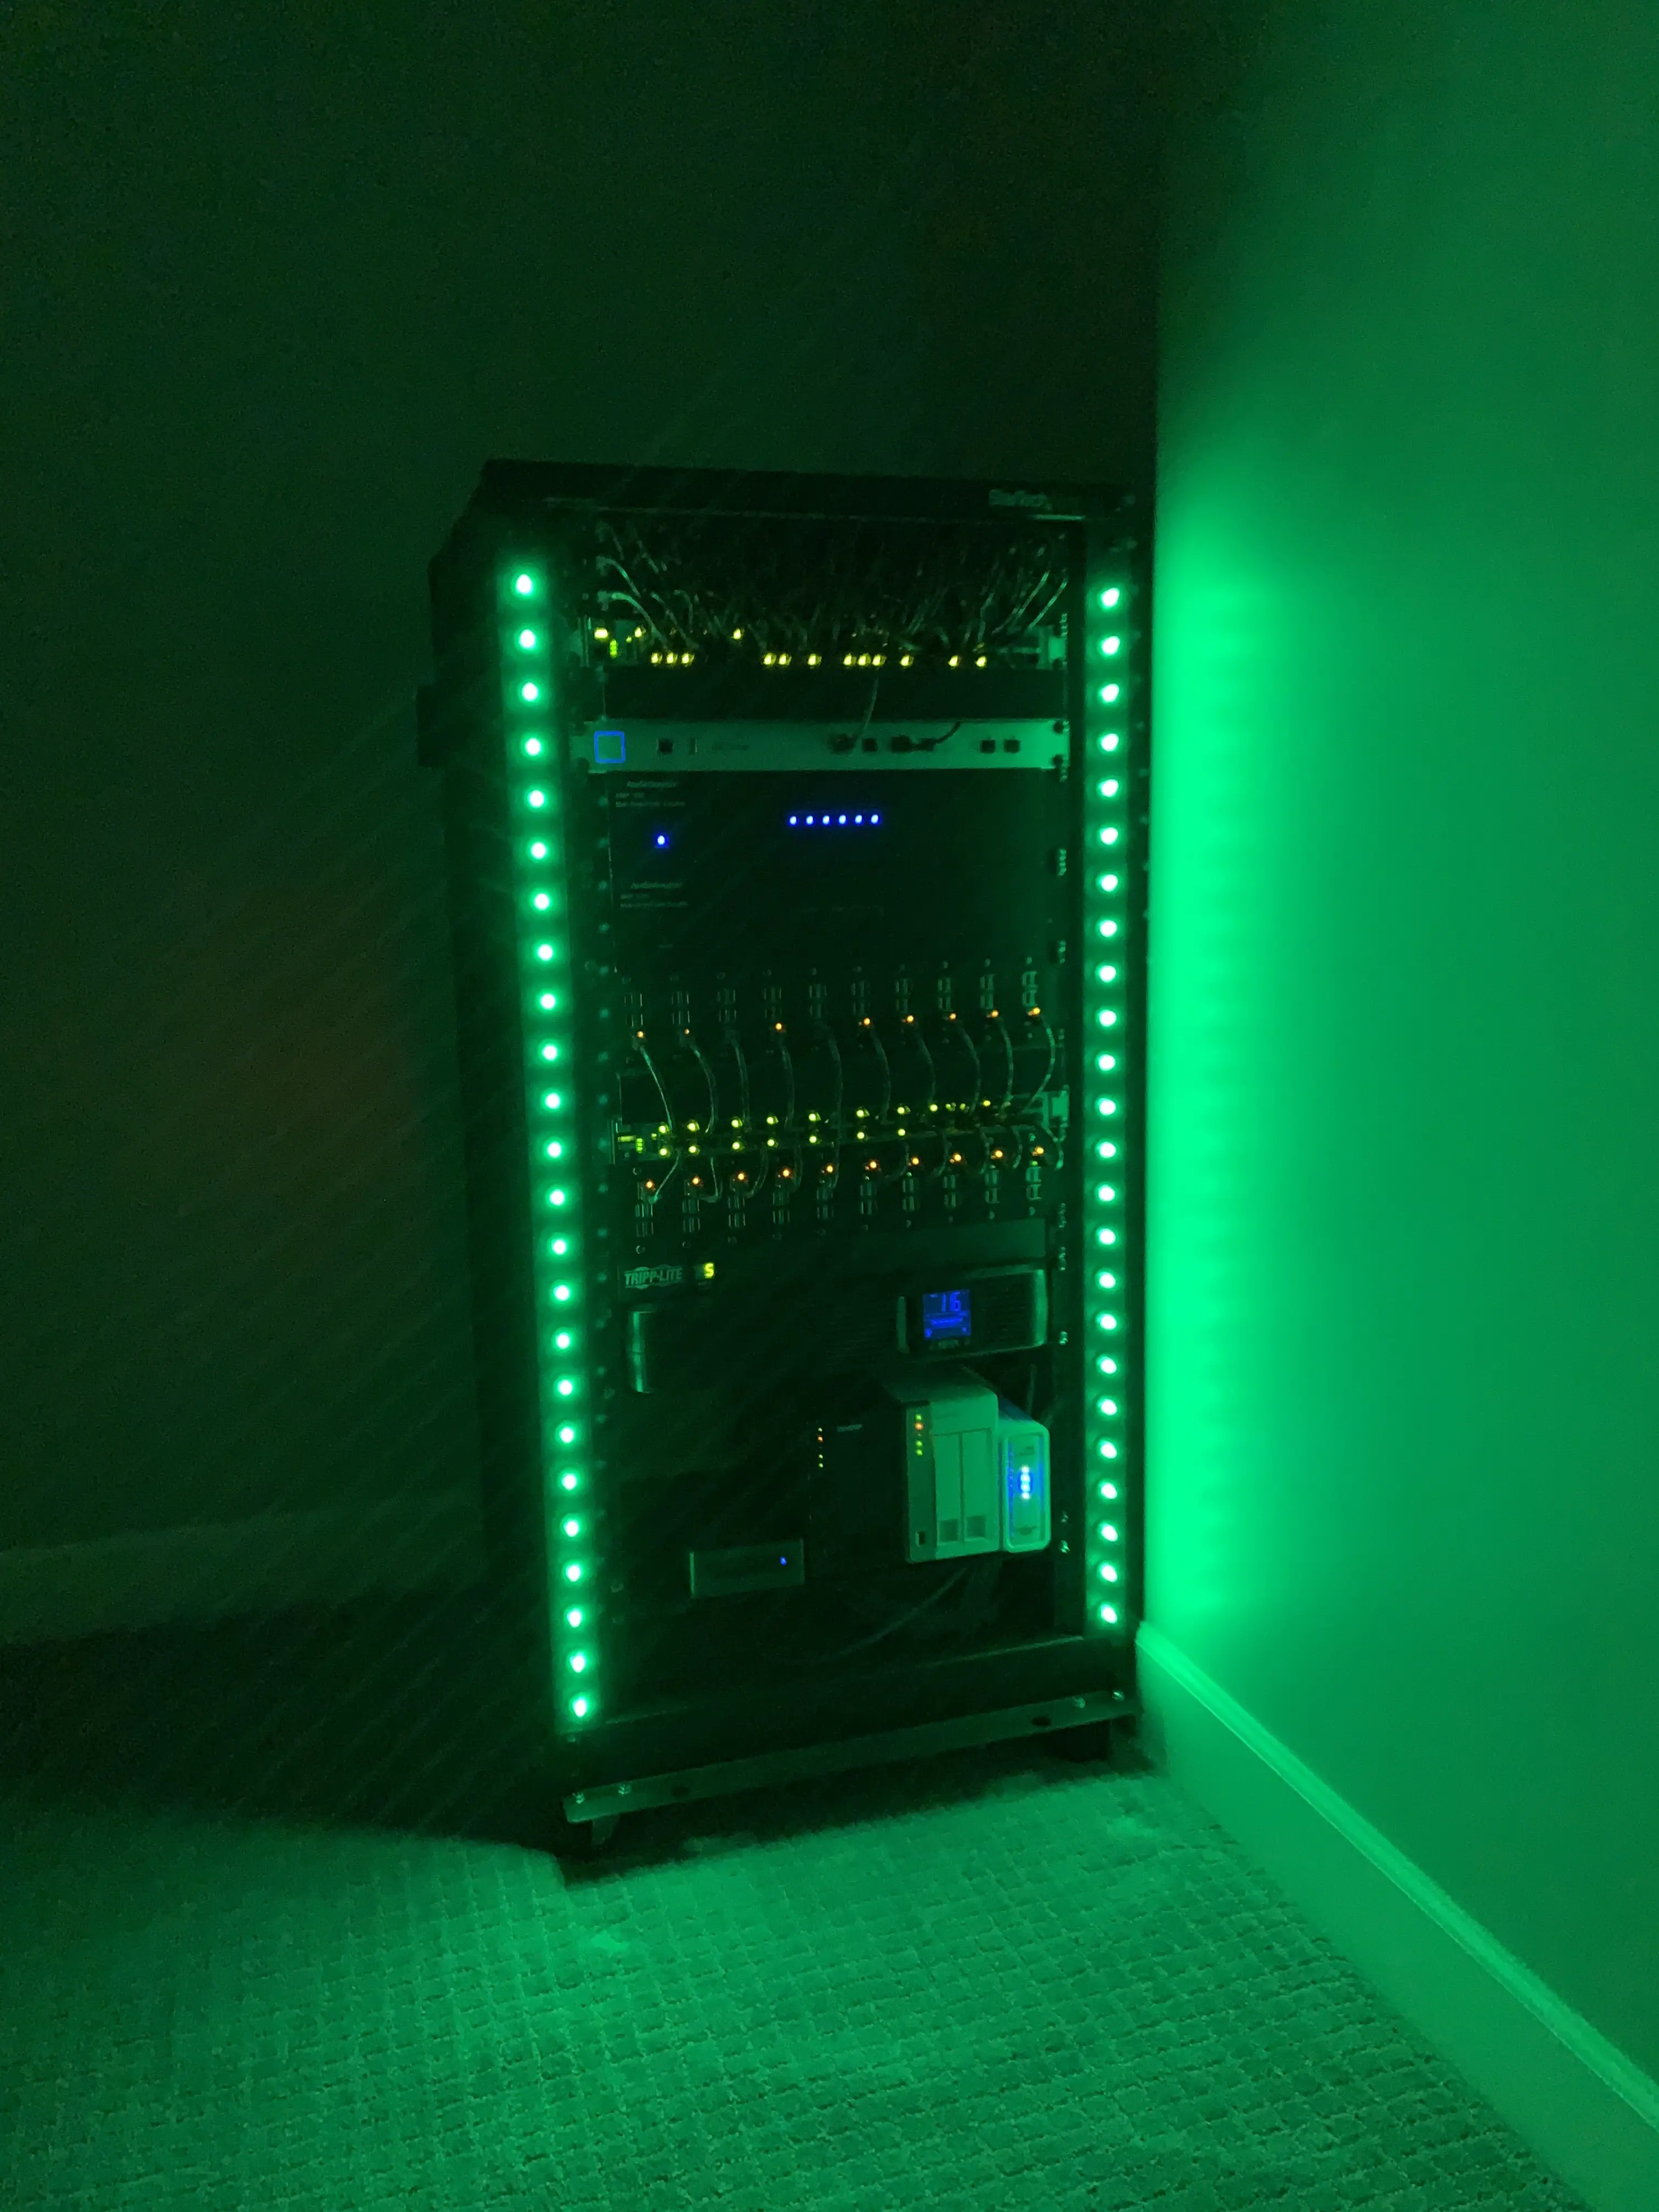 Server rack with green LEDs